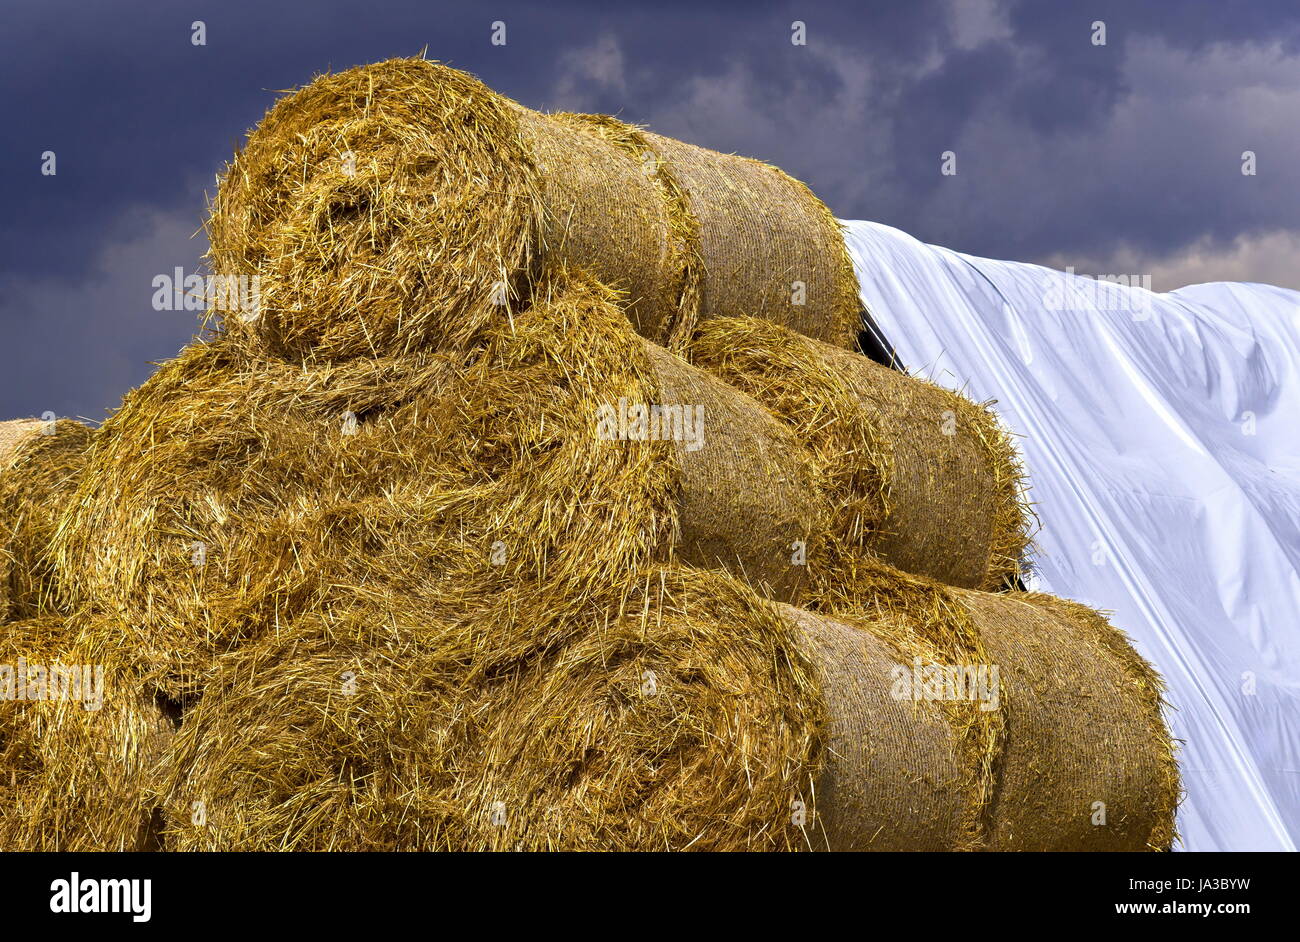 bale with tarp over each other Stock Photo